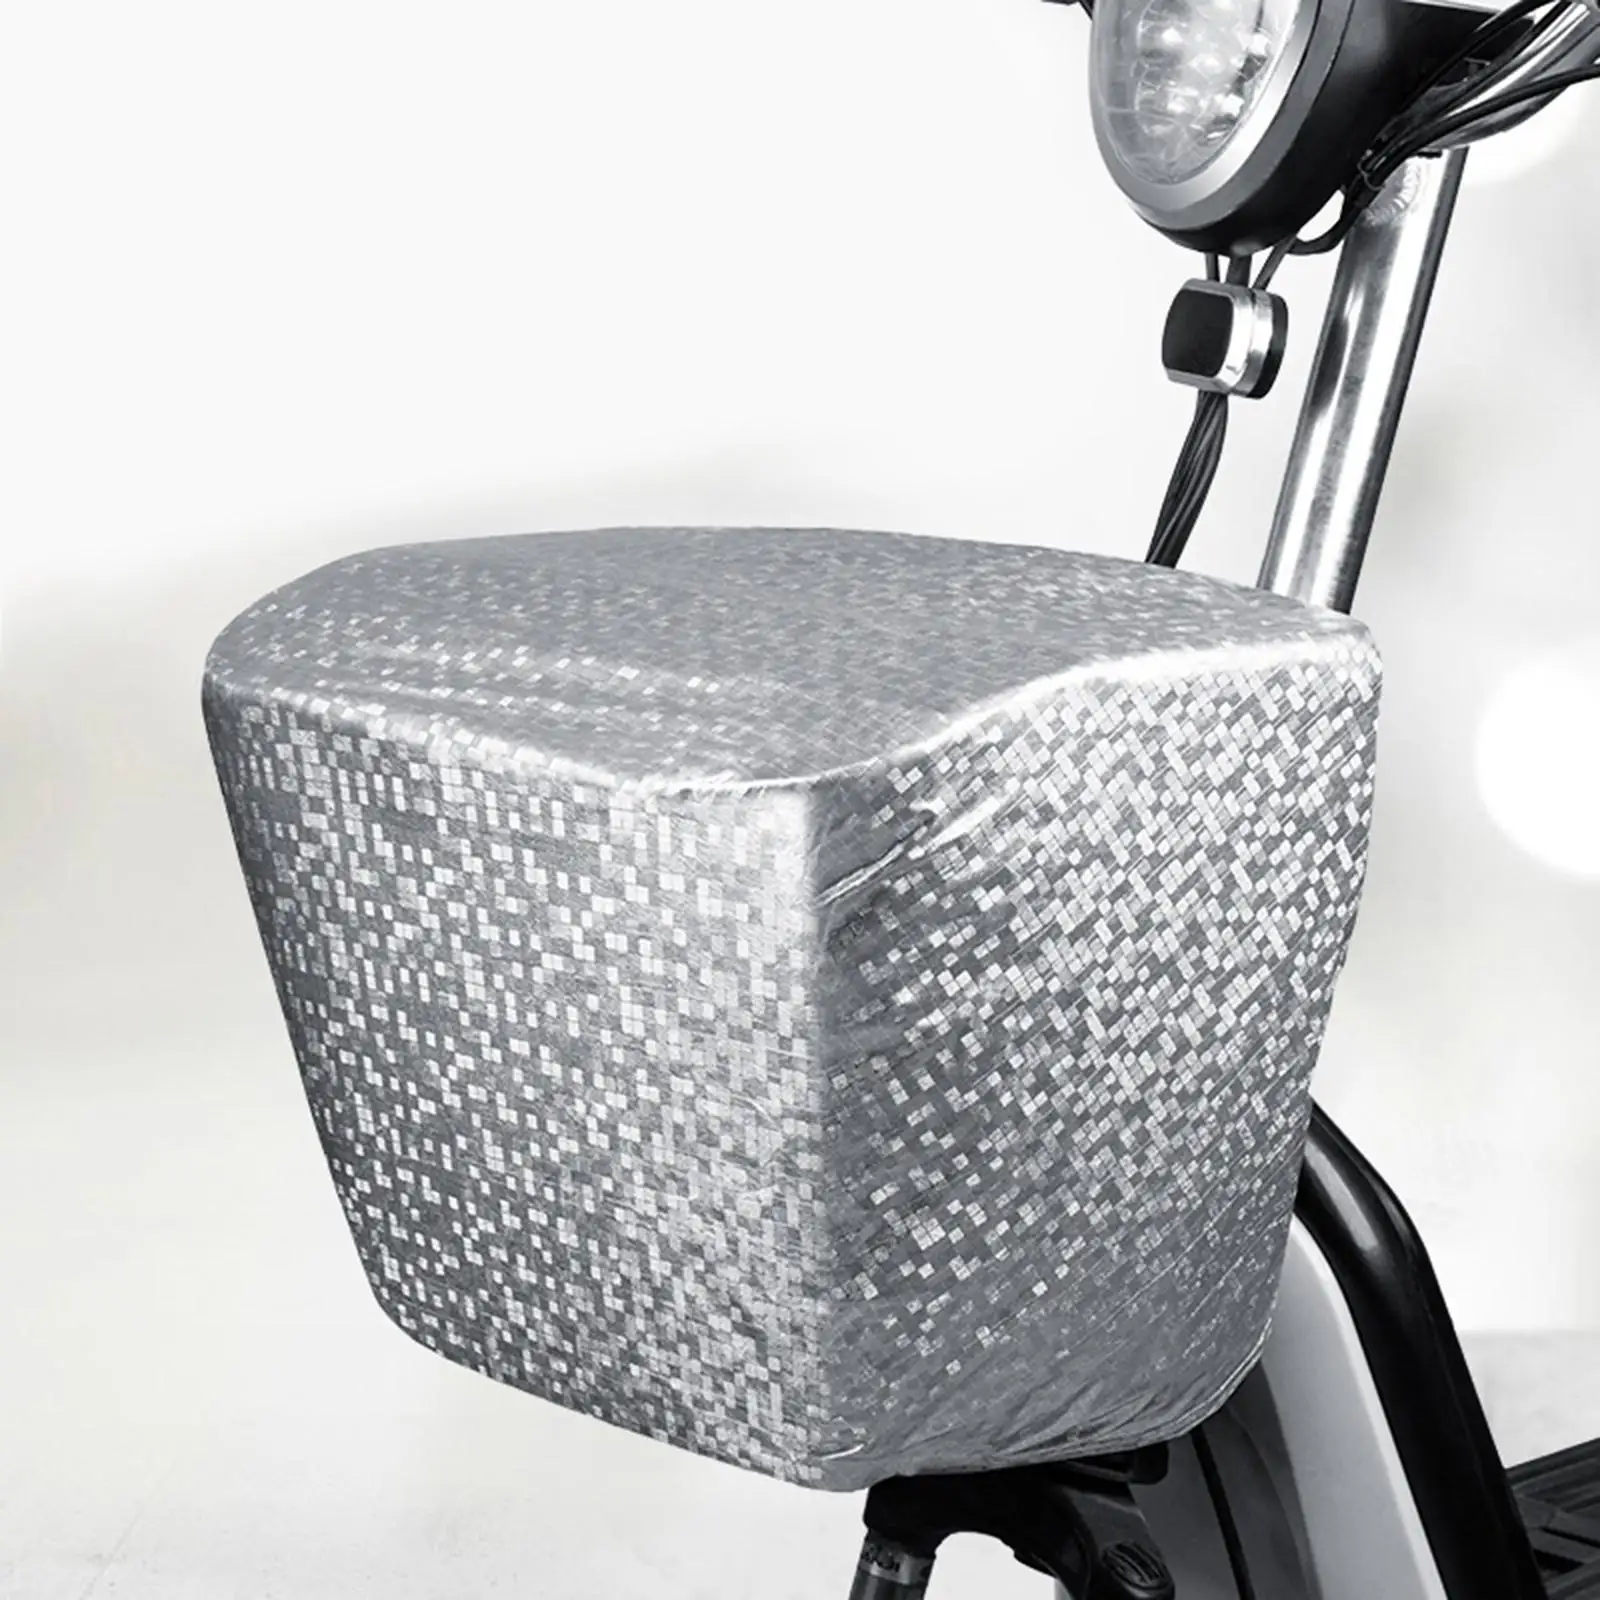 Bike Basket Cover Silver Sunproof Bicycle Basket Rain Cover Protective Cover for Motorcycles Tricycles Most Bicycle Baskets